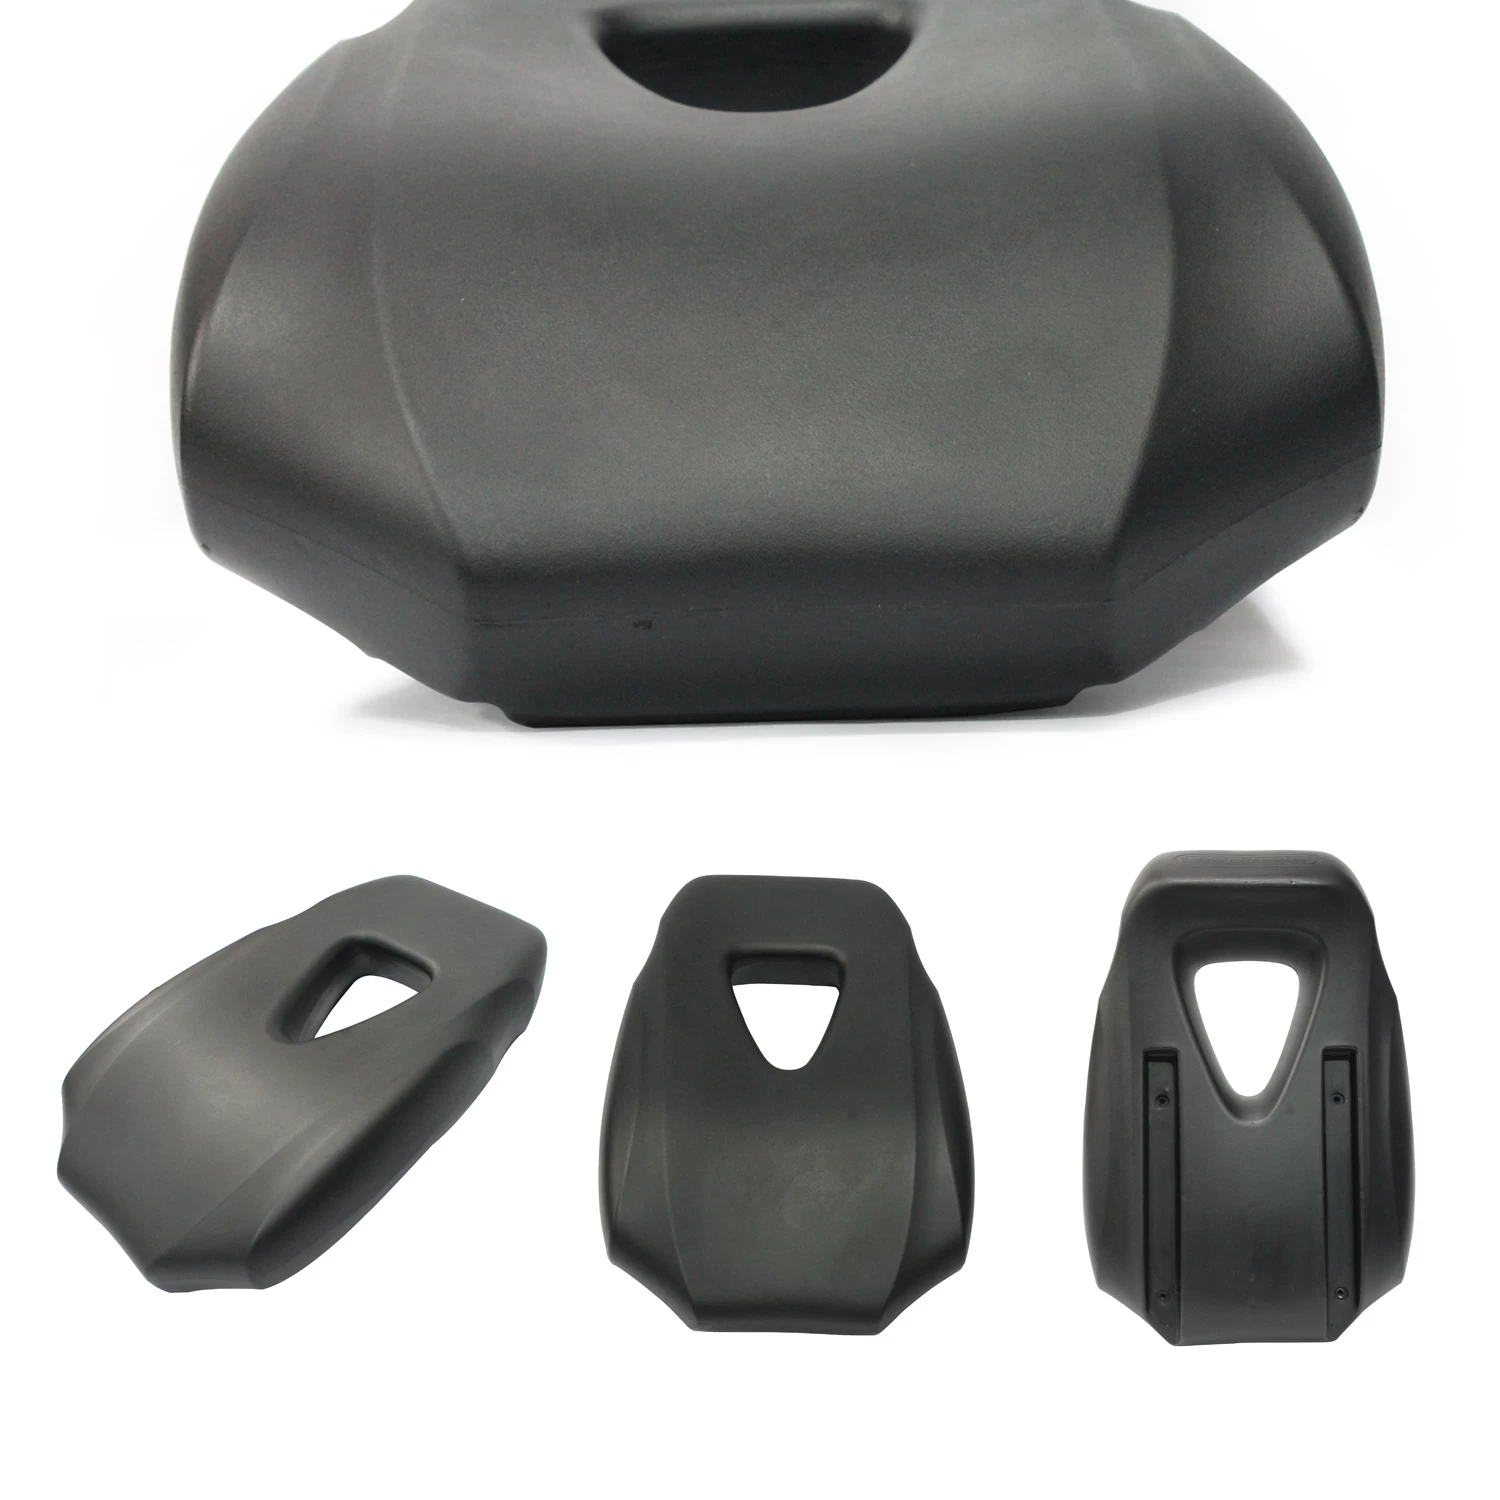 mower seat cushion,Car seating and backrest,truck seating cushion,lawn mower parts foam cushion